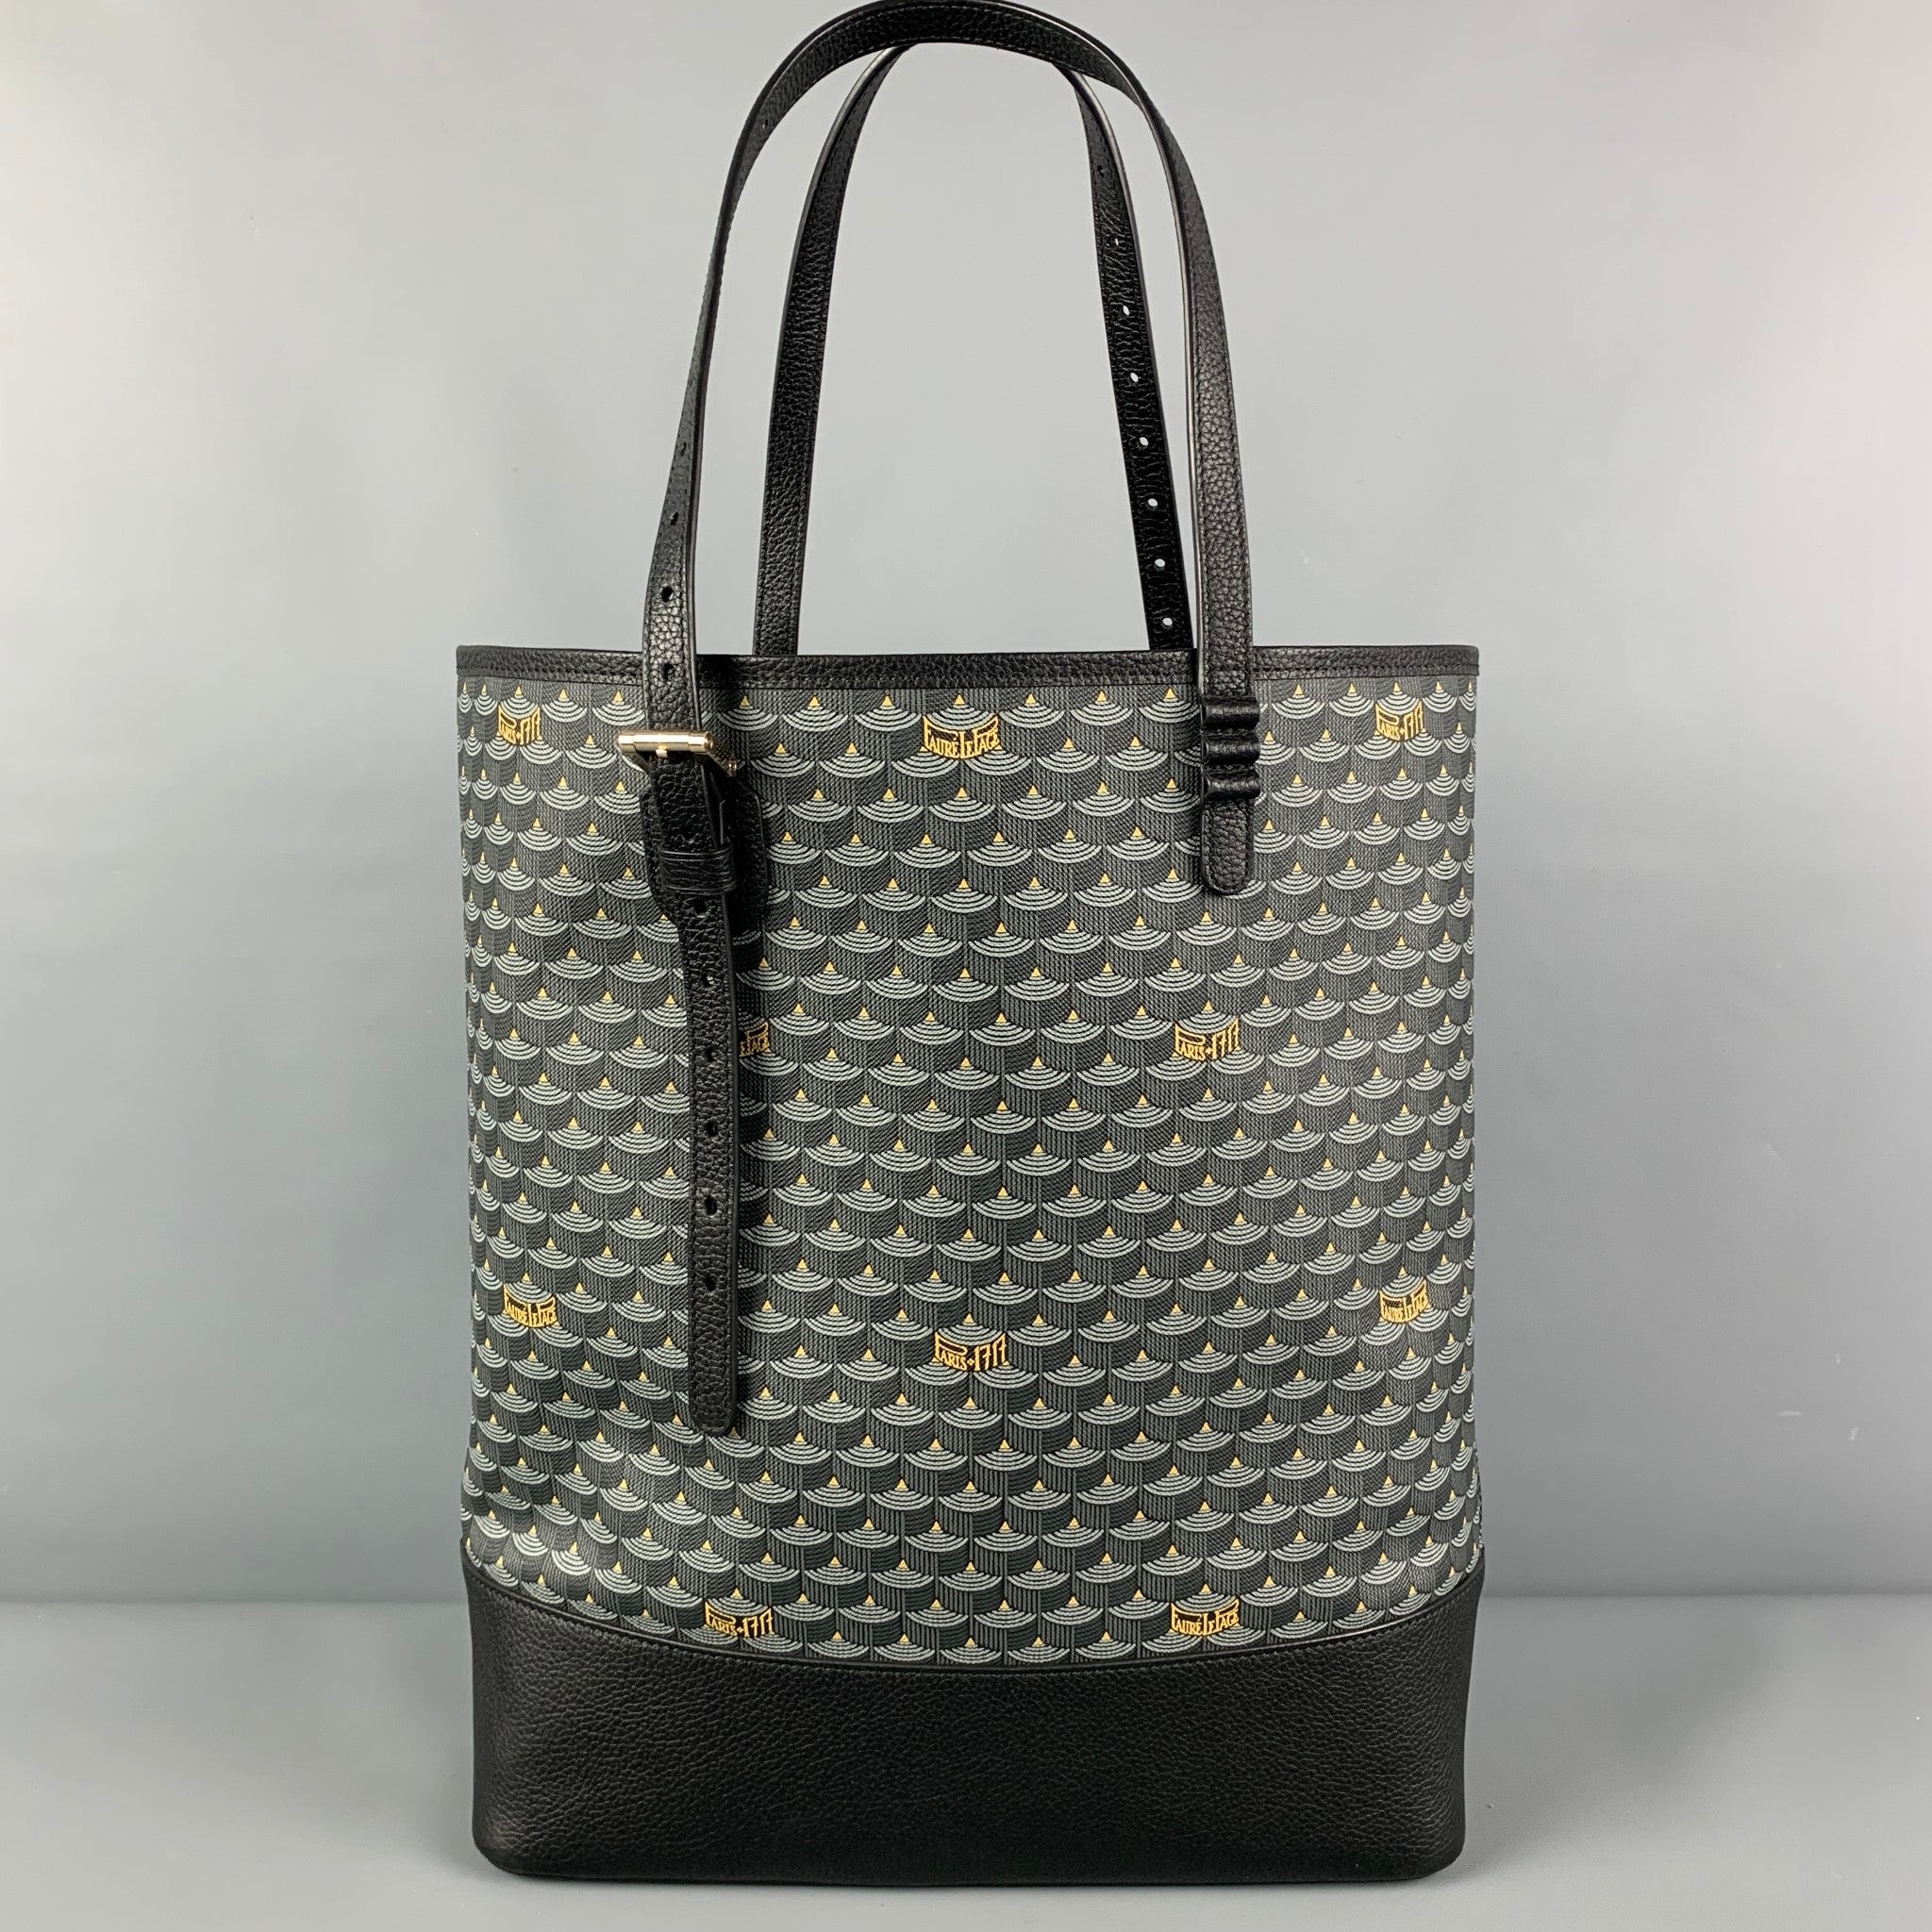 FAURE' LE PAGE Grey Black Coated Canvas Tote Bag